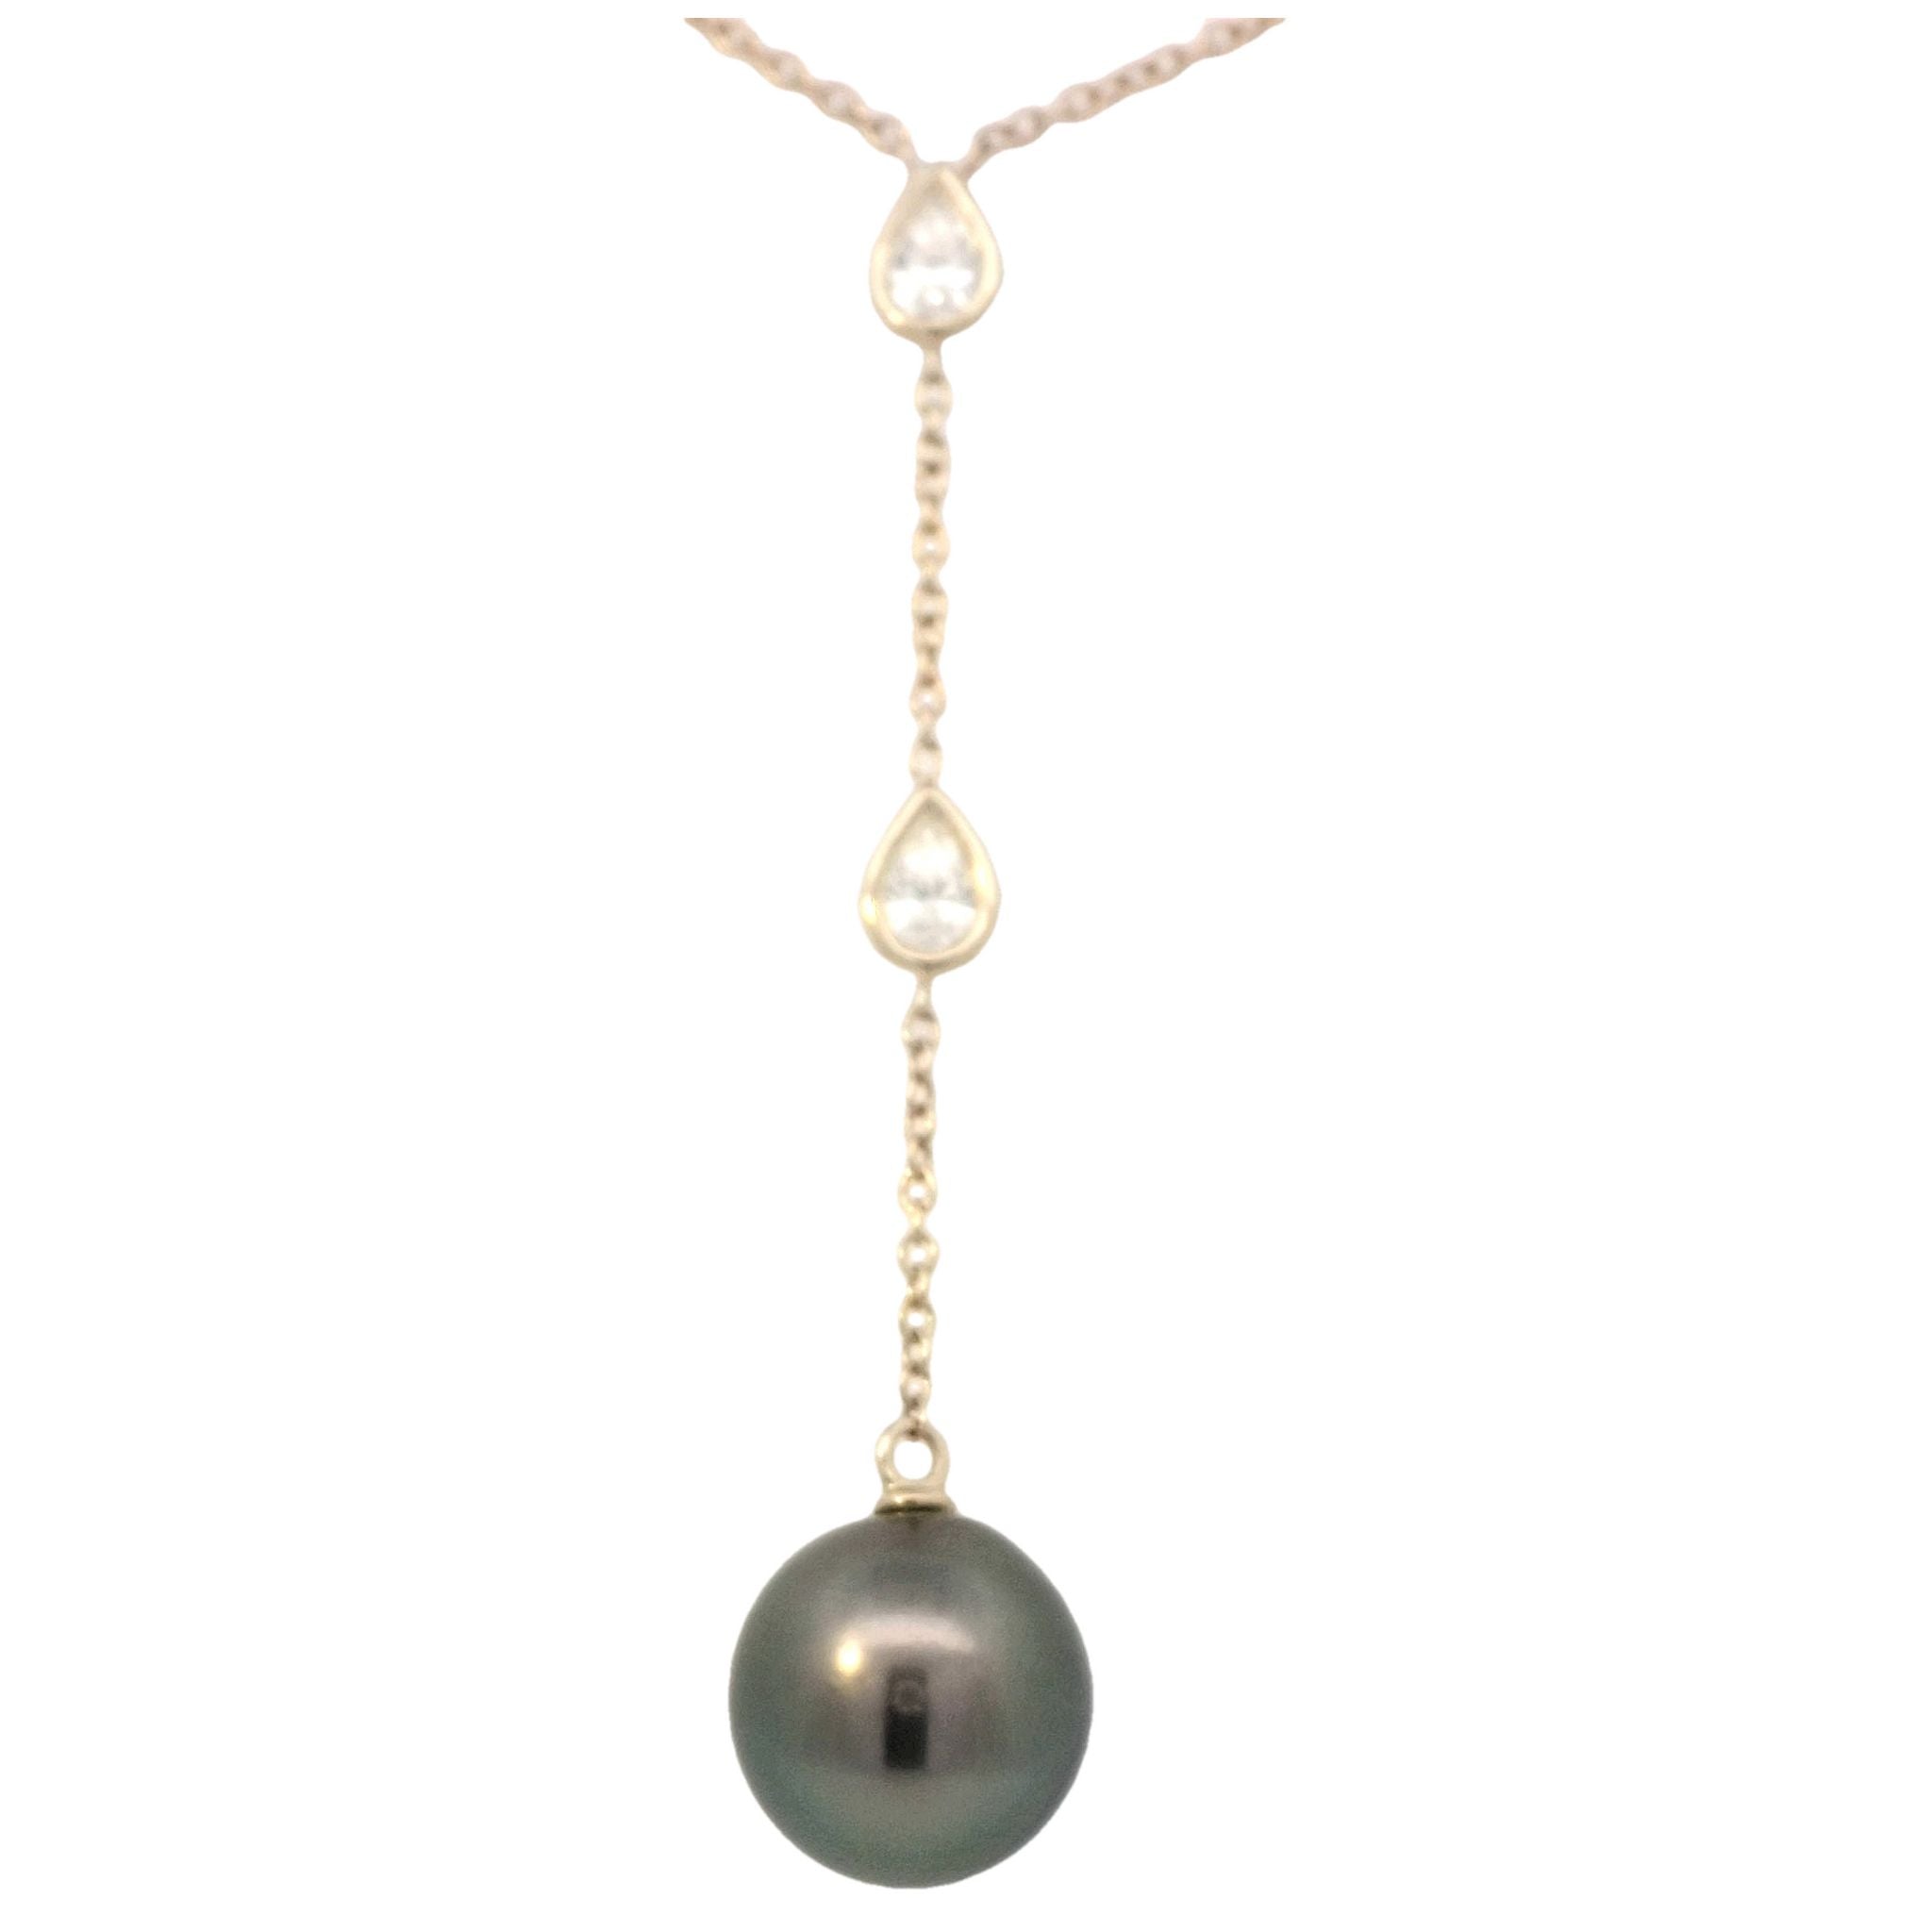 Tahitian Pearl Lariat Necklace with Diamonds